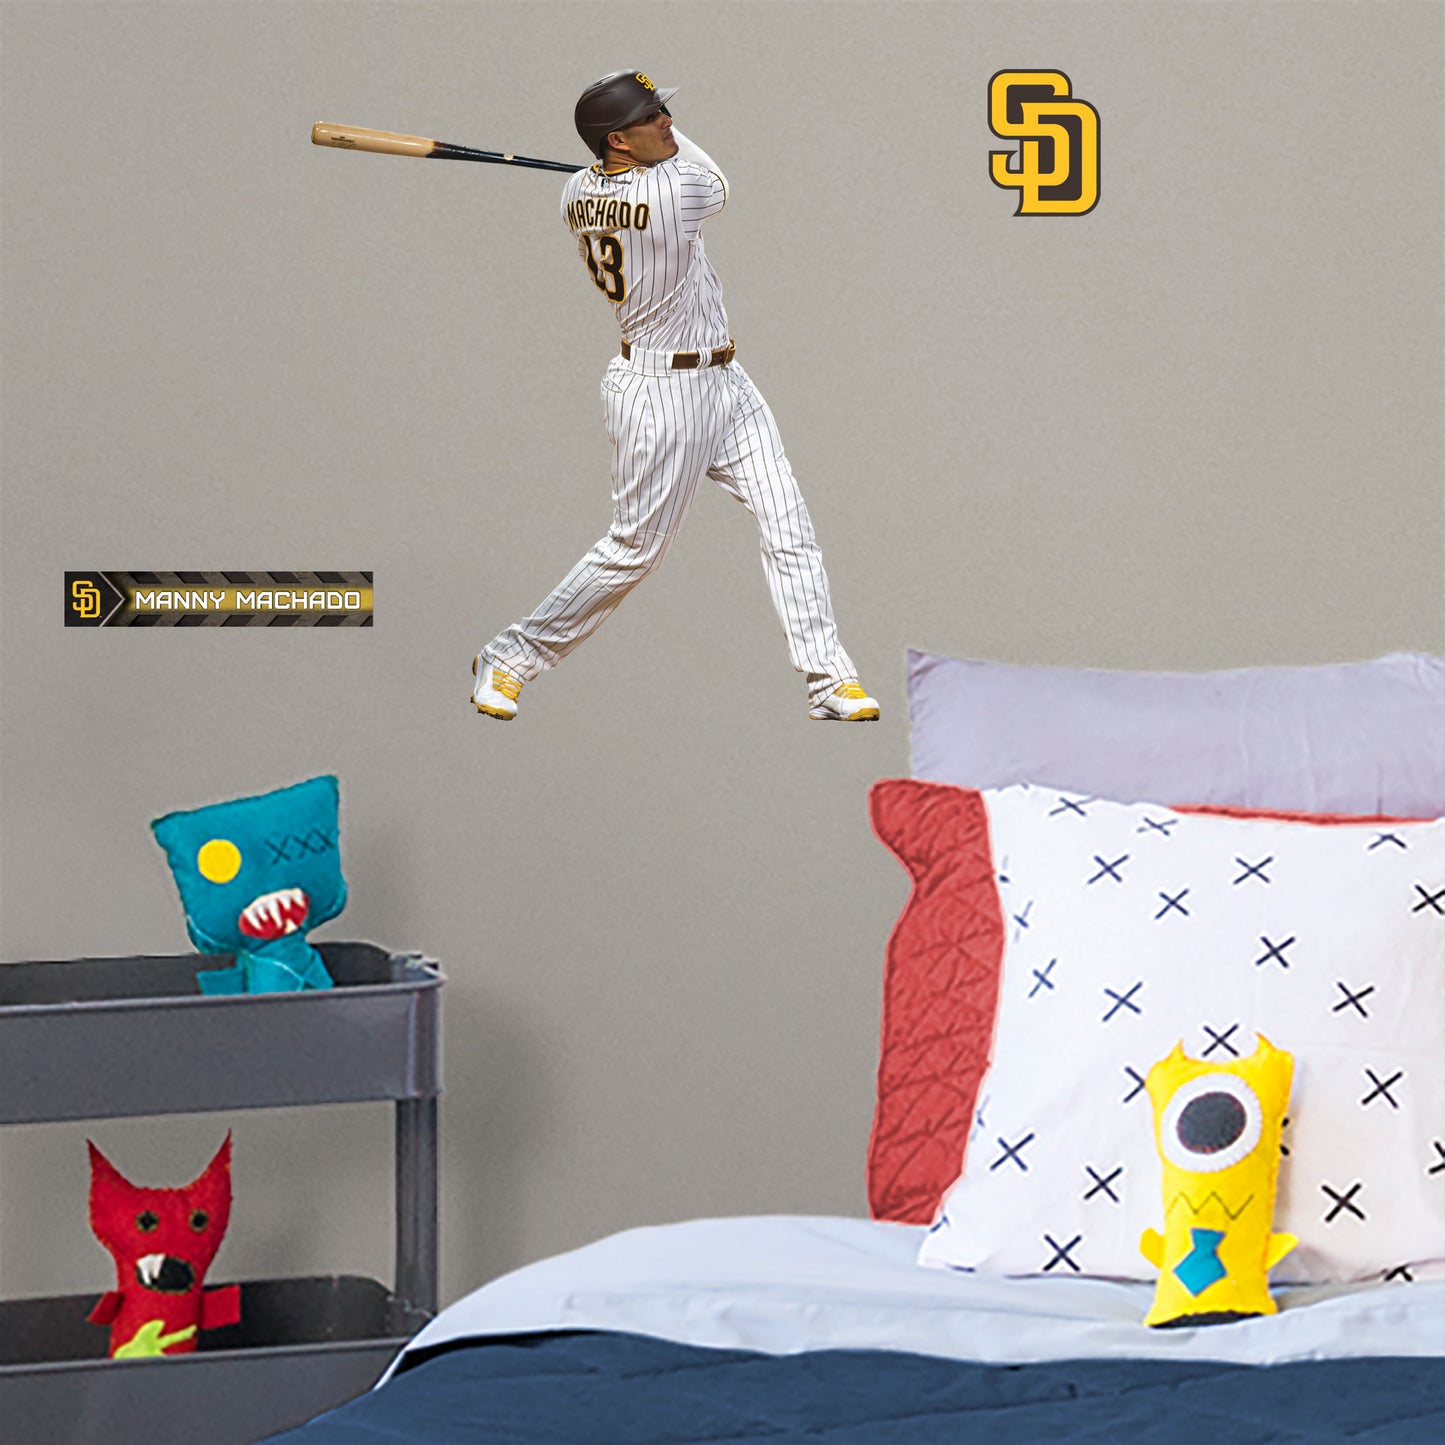 San Diego Padres: Manny Machado 2021        - Officially Licensed MLB Removable Wall   Adhesive Decal